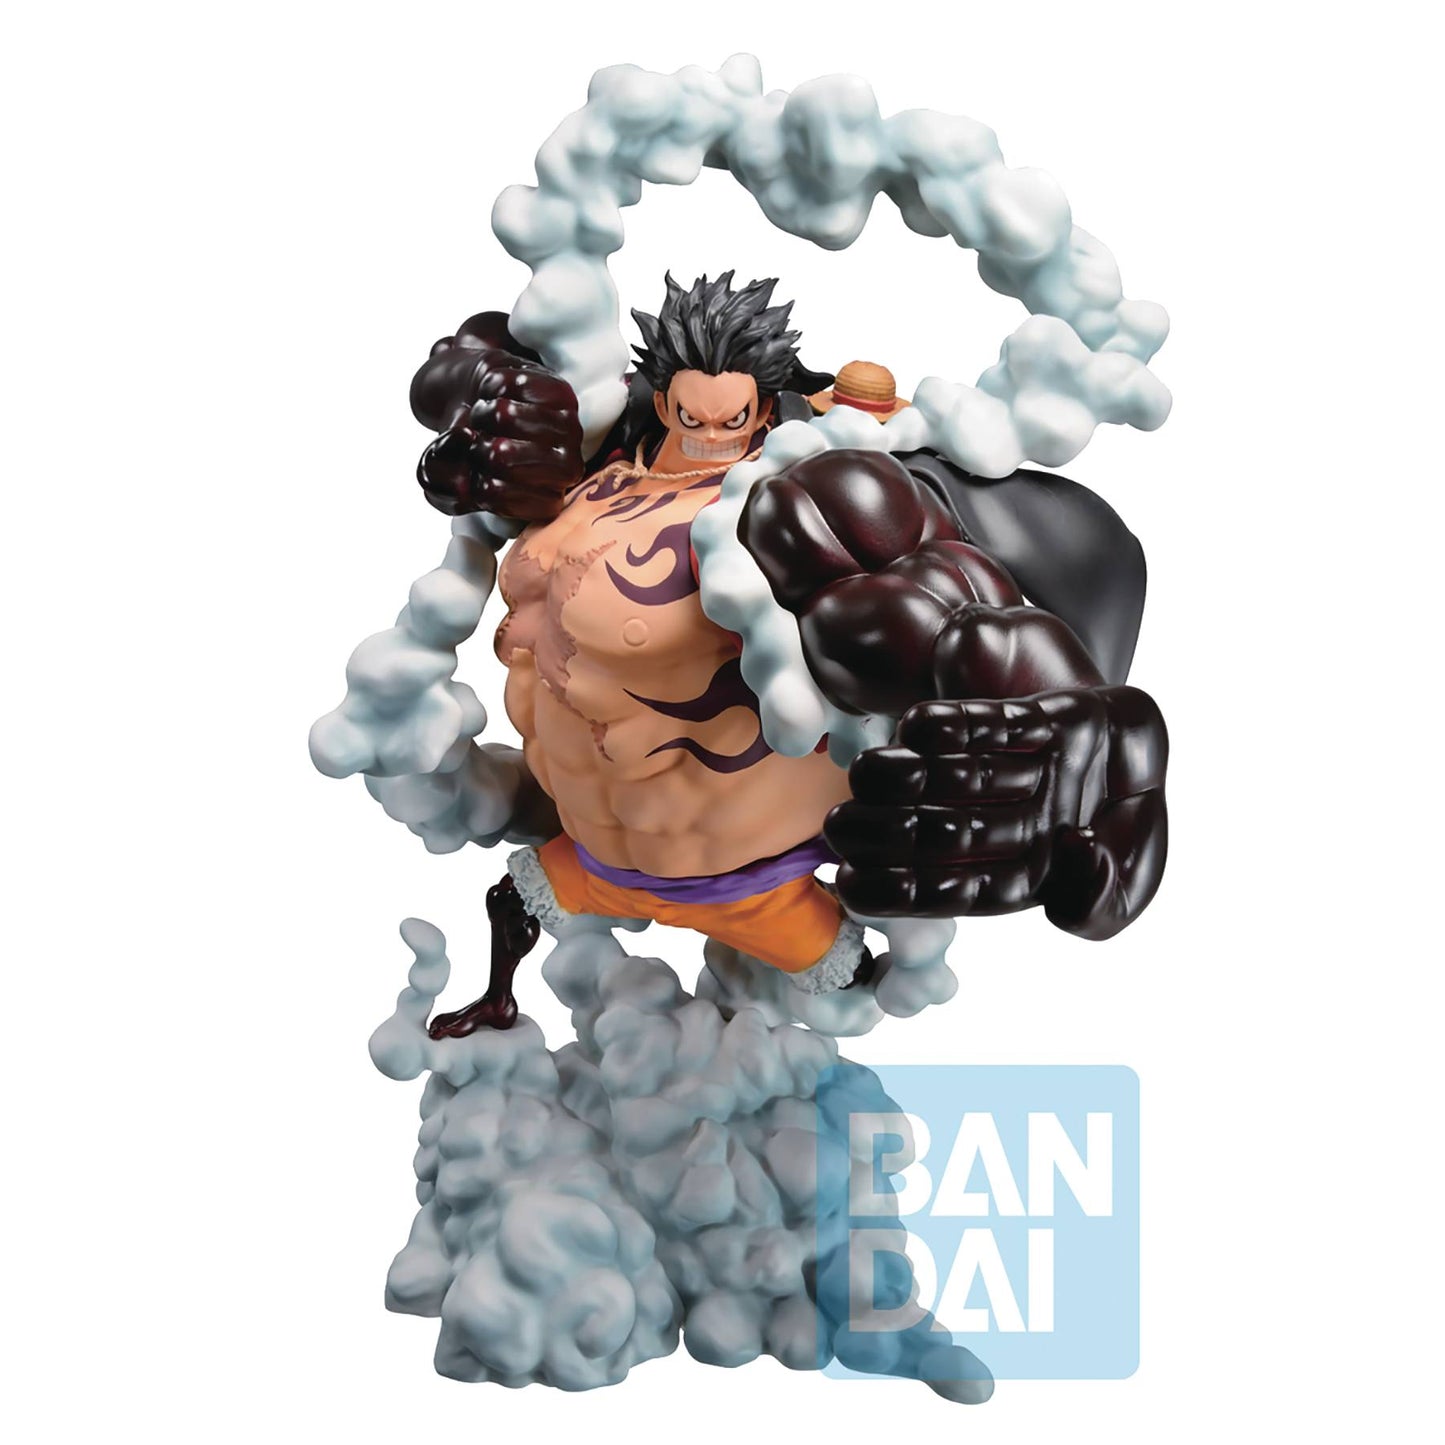 ONE PIECE WANO COUNTRY 3RD ACT MONKEY D LUFFY ICHIBAN FIG